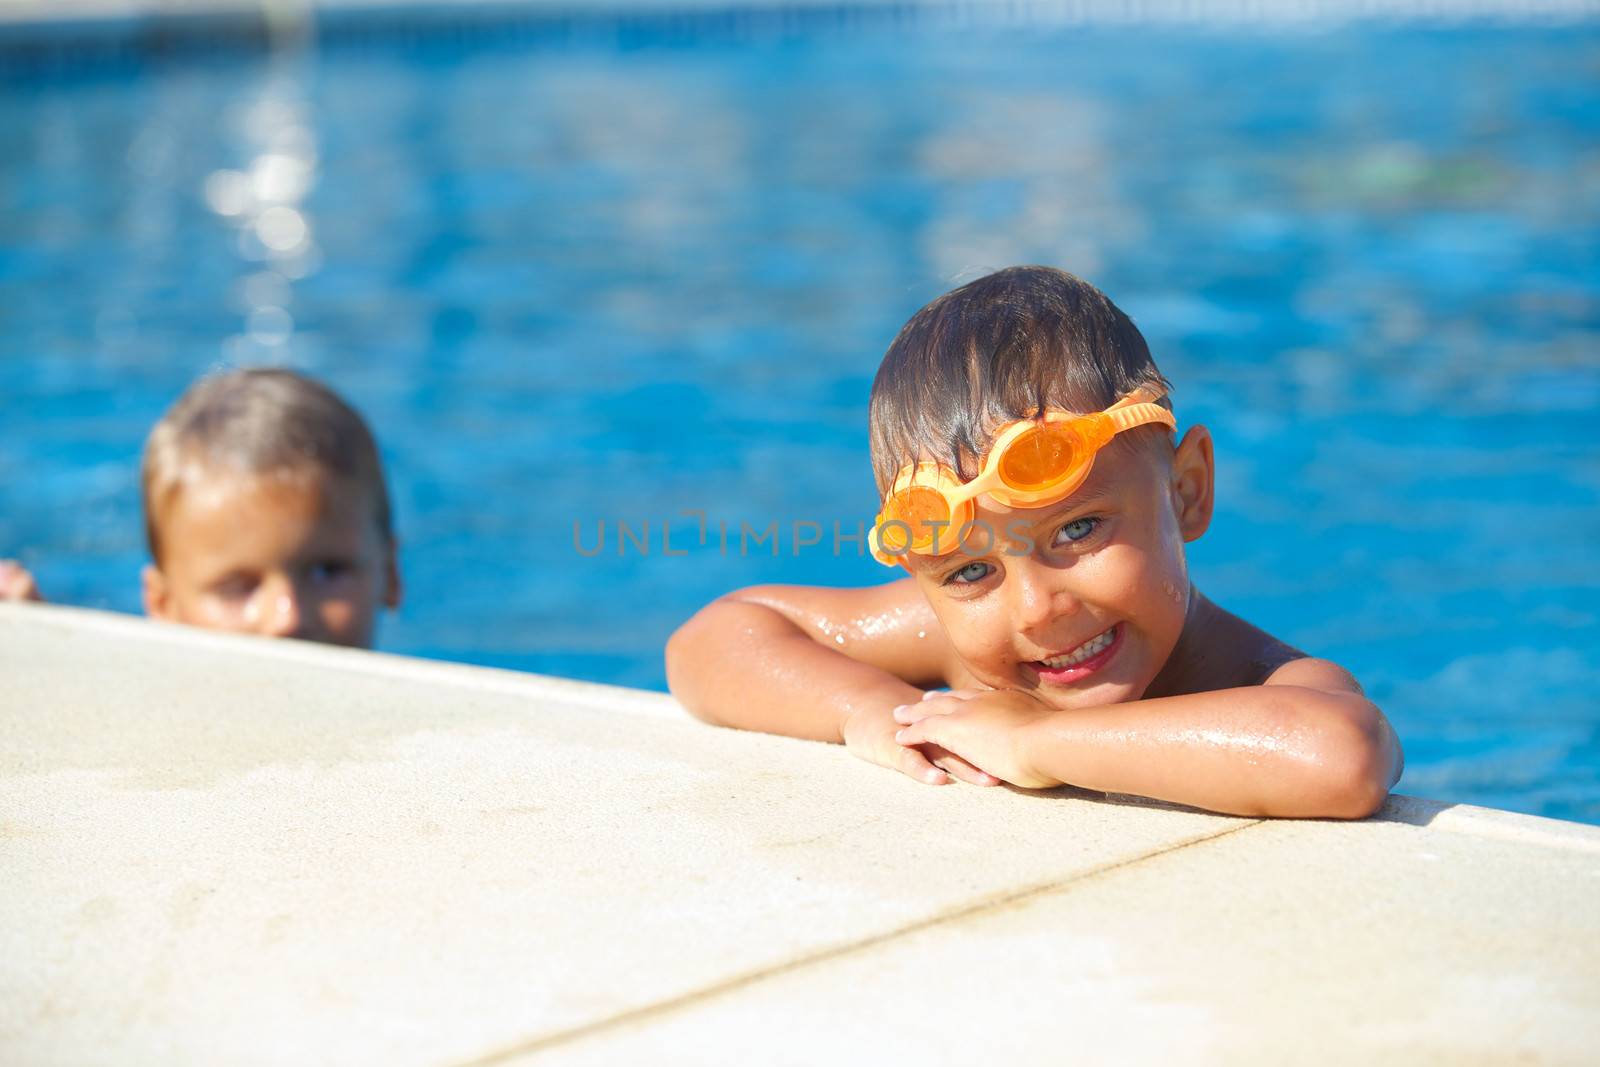 Activities on the pool. Cute boy in swimming pool